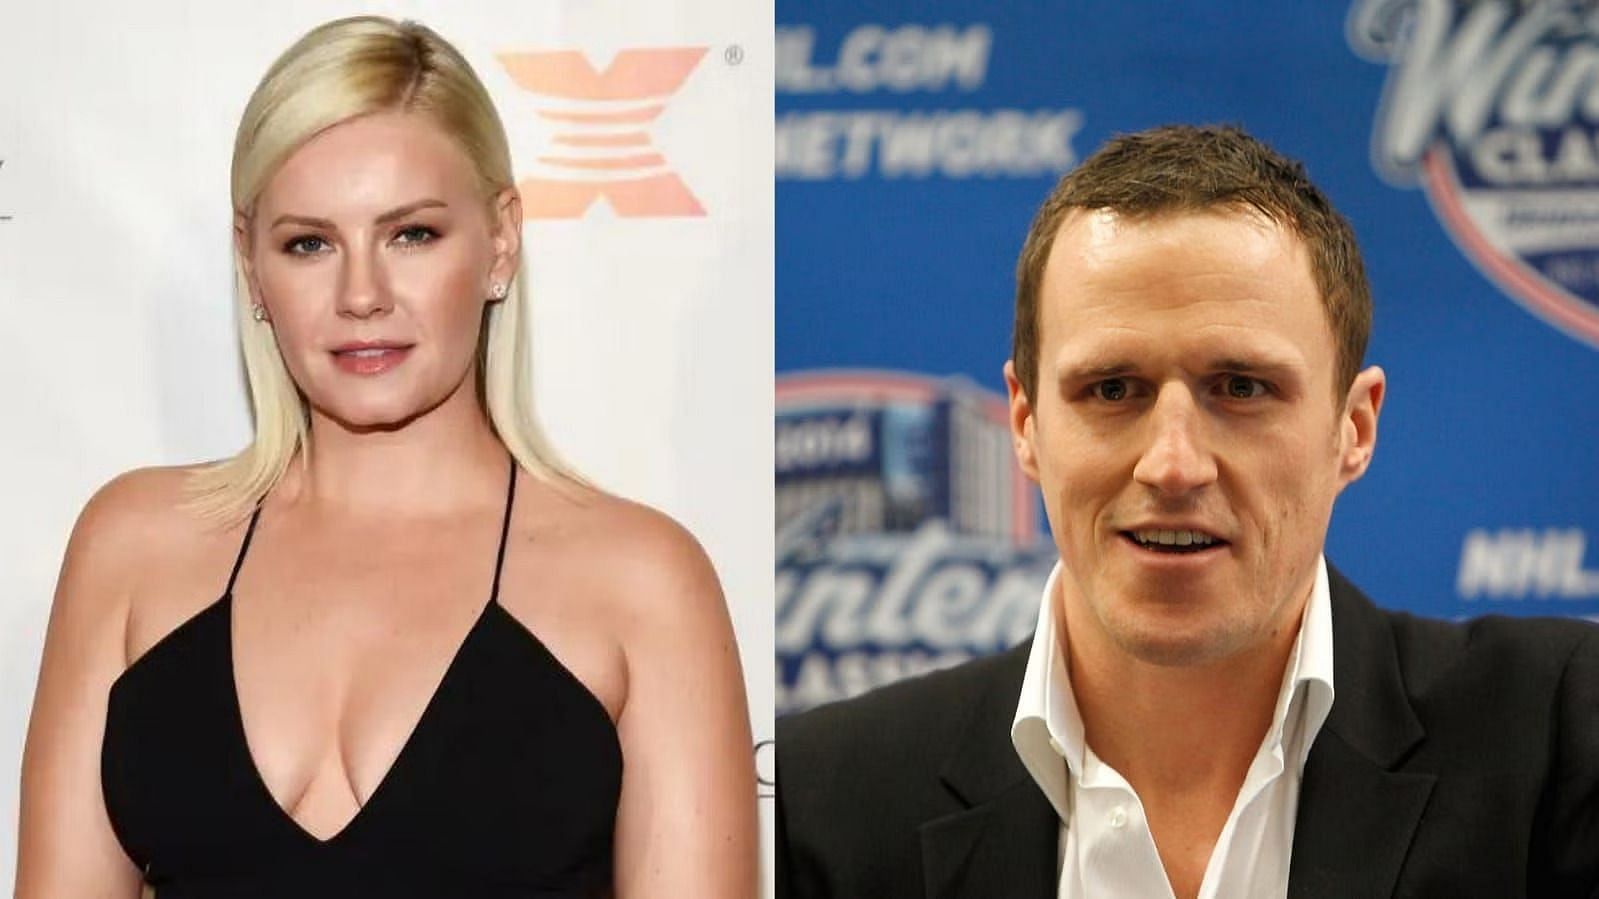 Elisha Cuthbert (left) and Dion Phaneuf (right)